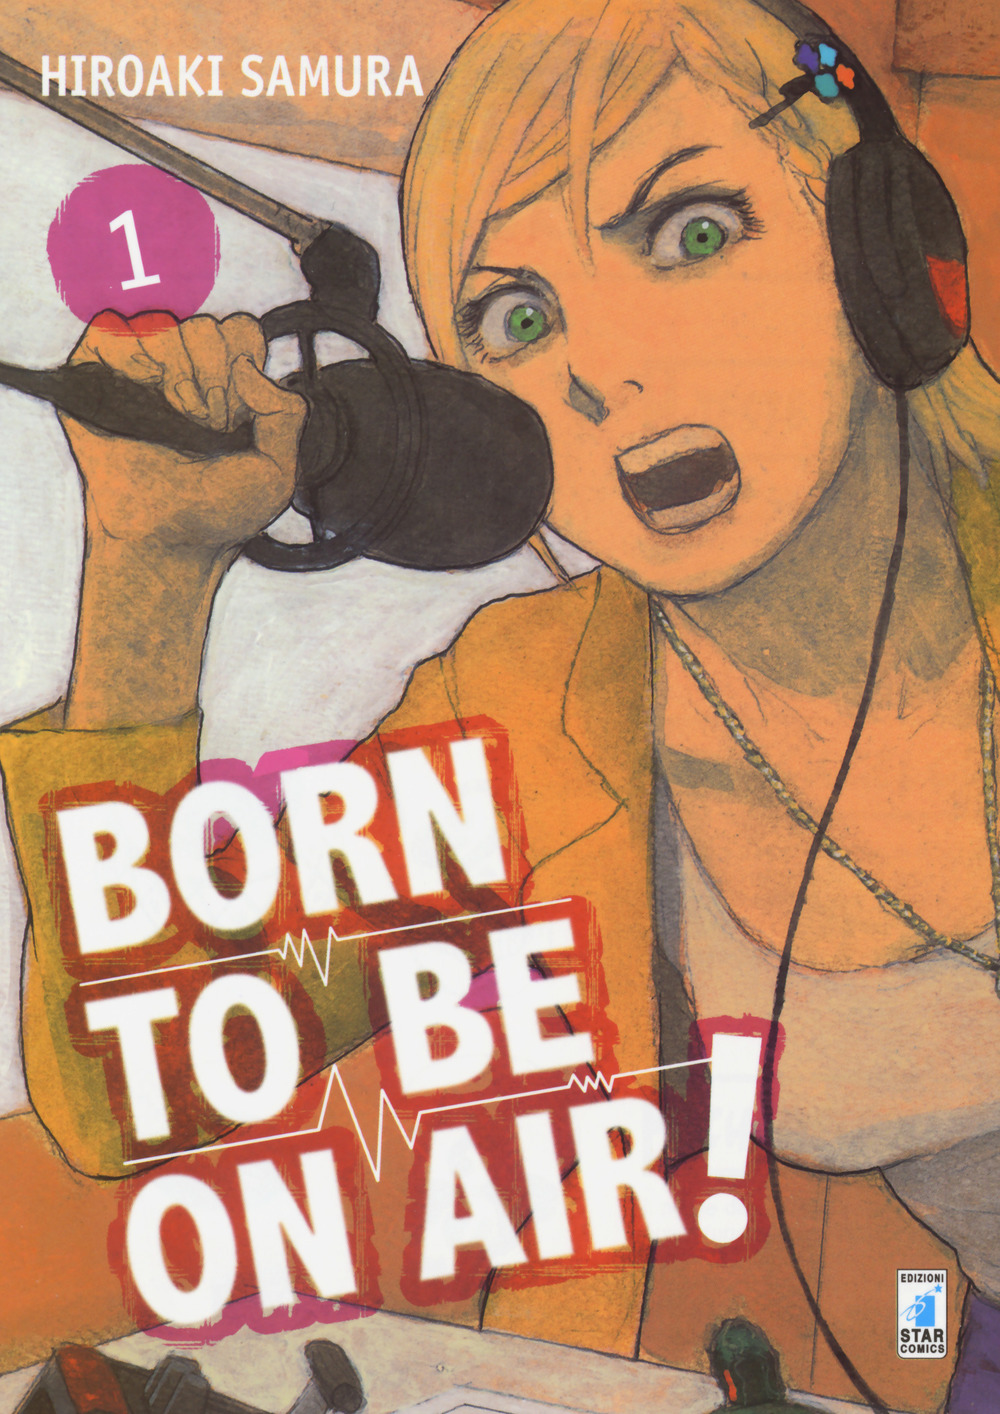 Born to be on air!. Vol. 1